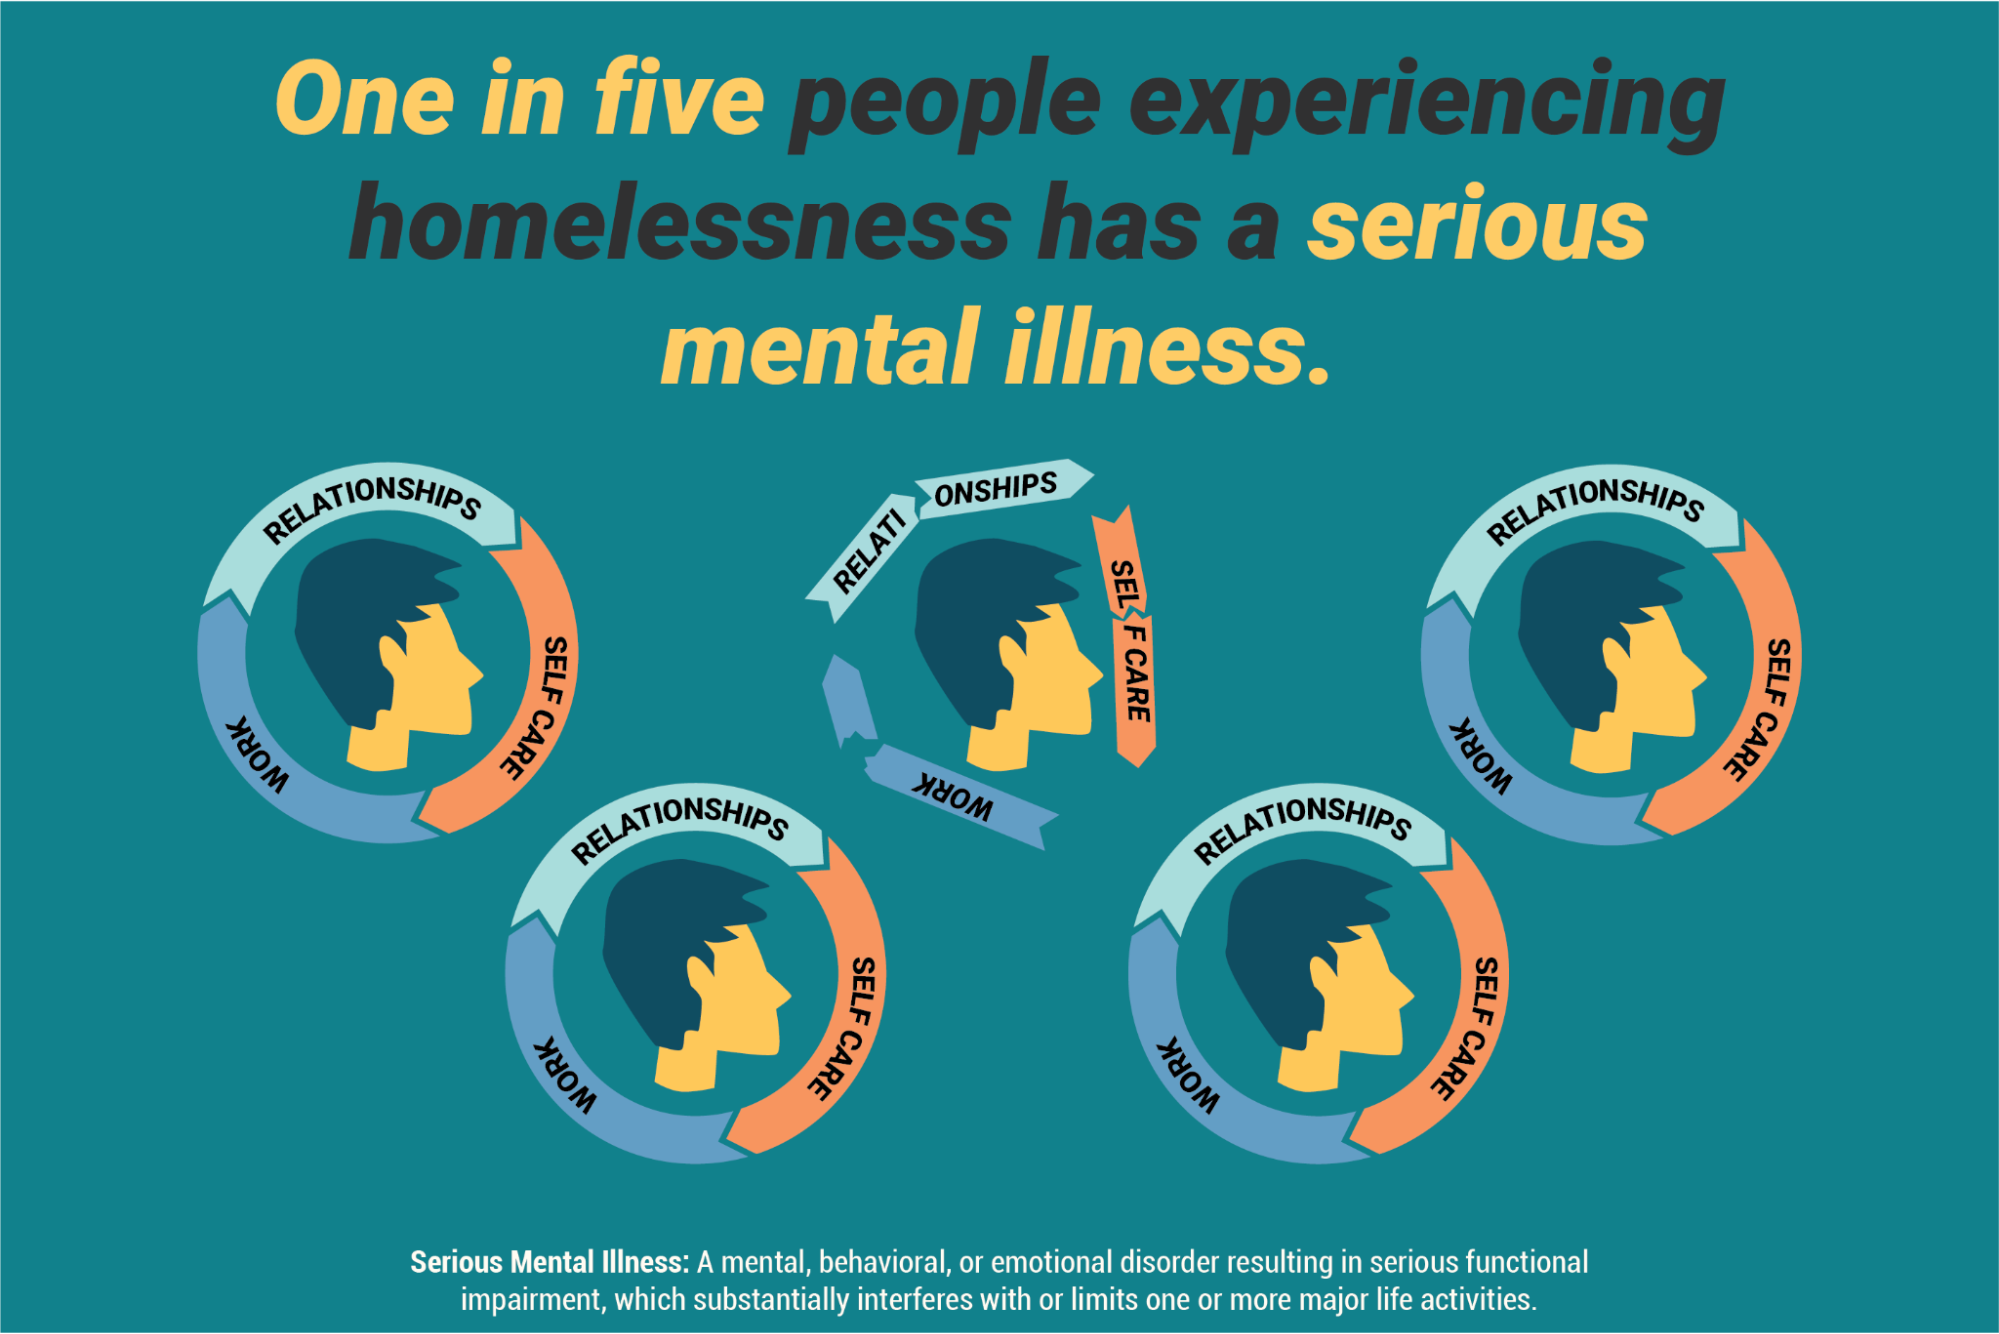 One in five people experiencing homelessness has a serious mental illness